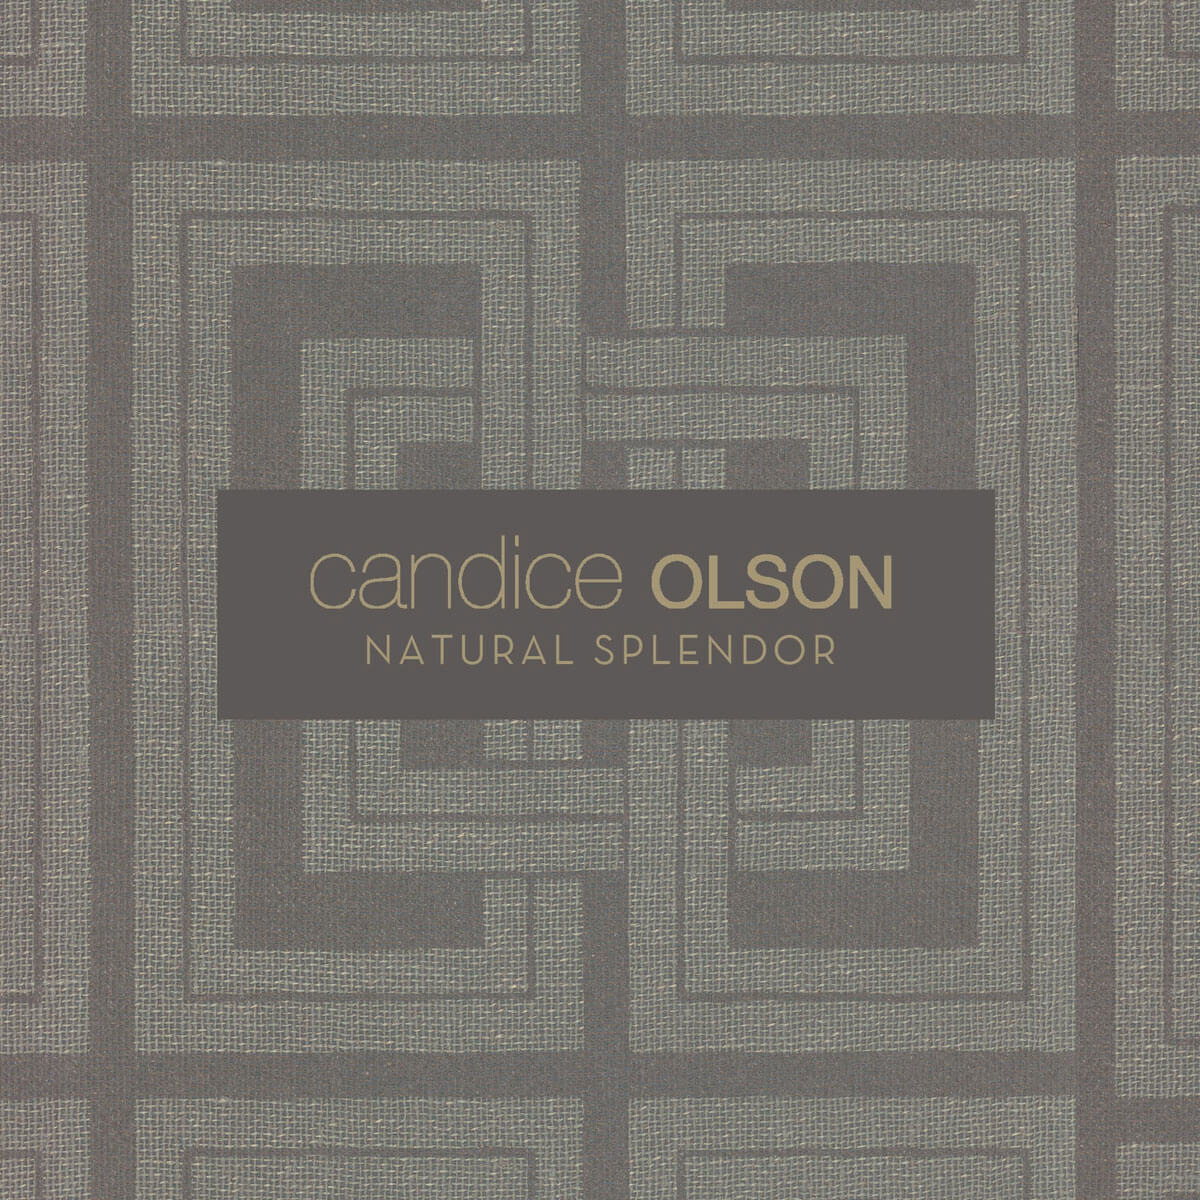 Candice Olson Sublime Wallpaper - SAMPLE SWATCH ONLY